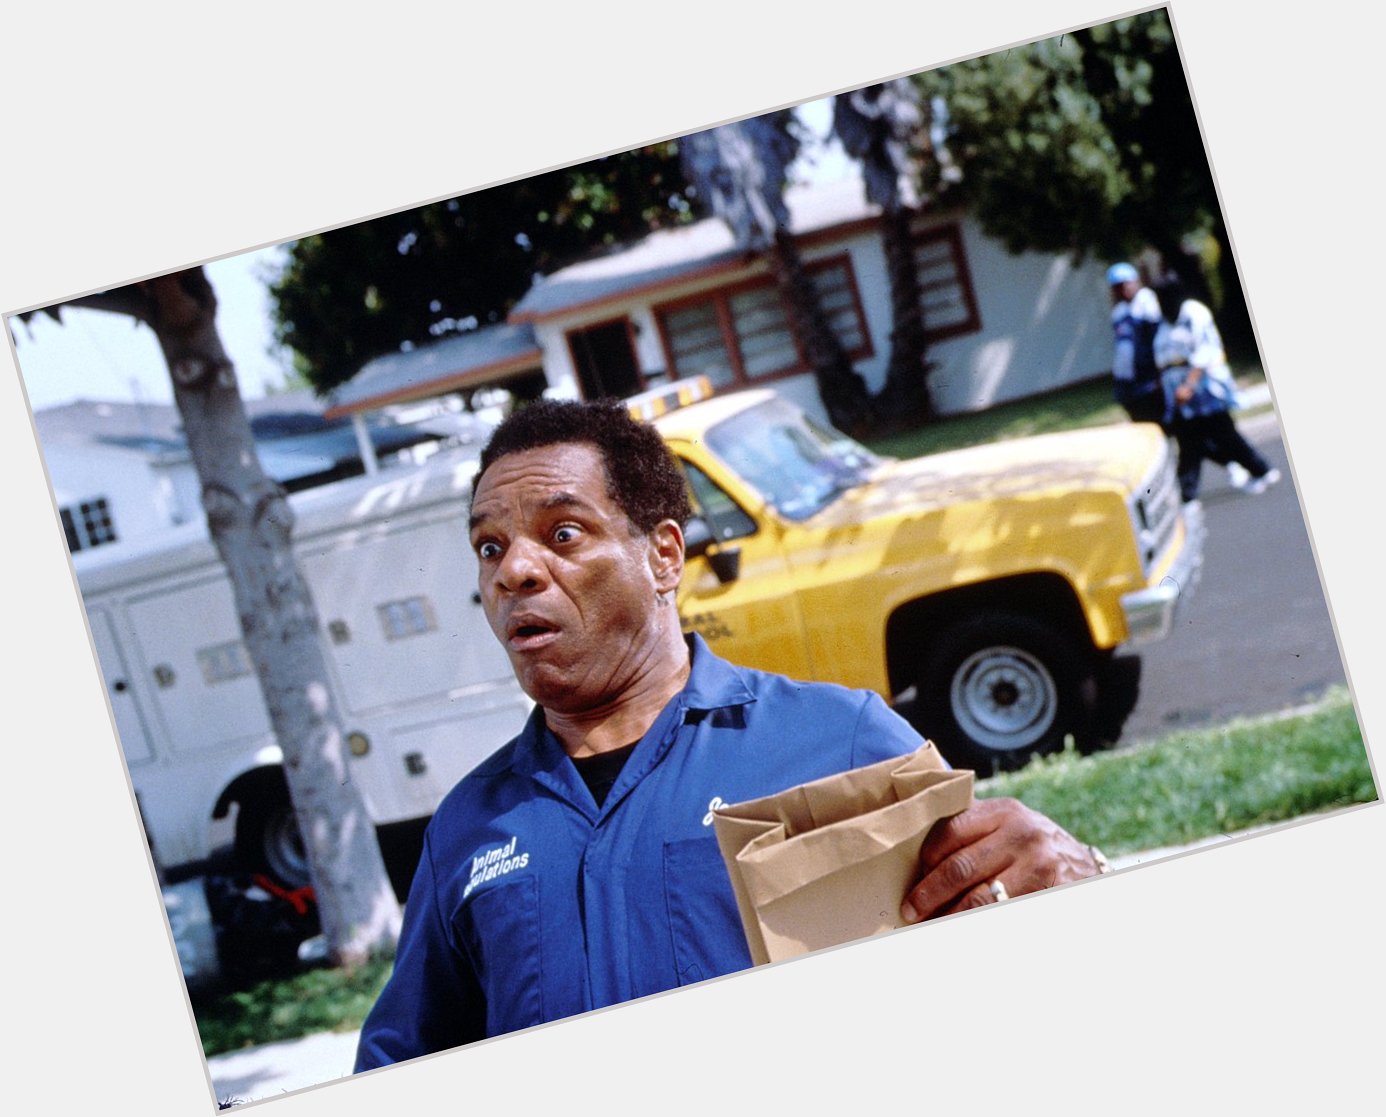 Happy Birthday to John Witherspoon, who turns 75 today! 